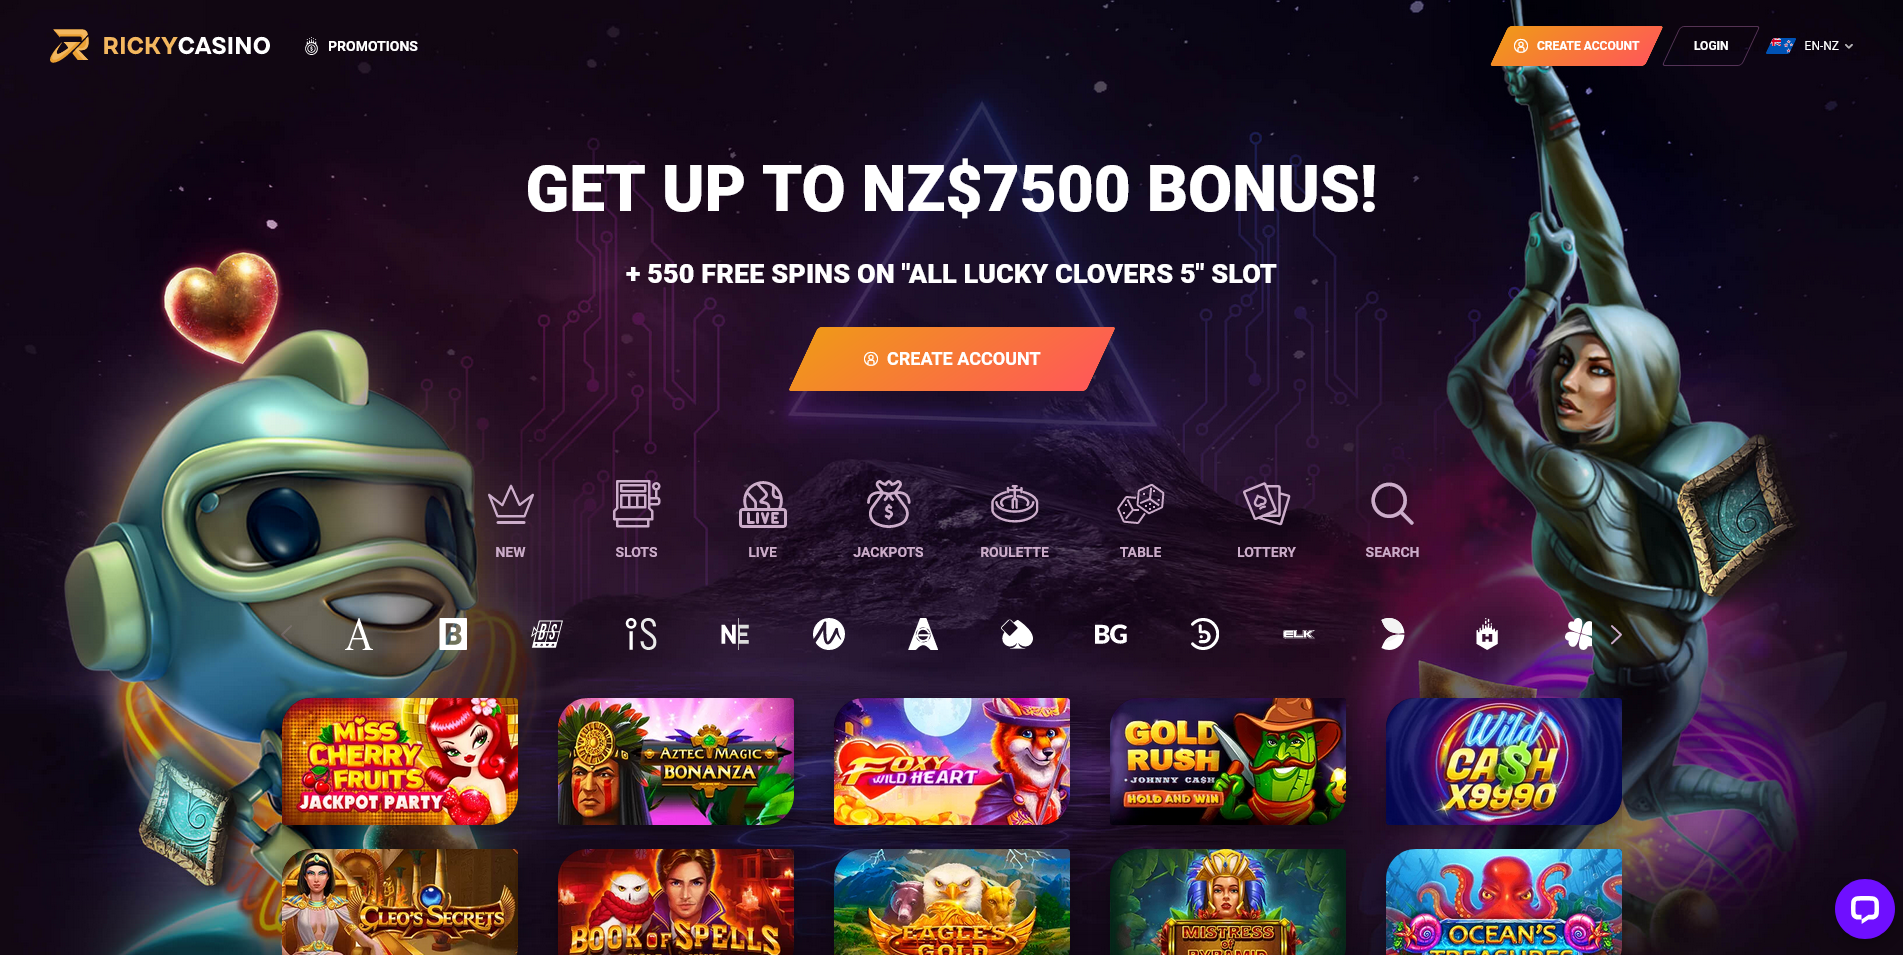 Screenshot of the Ricky Casino home page